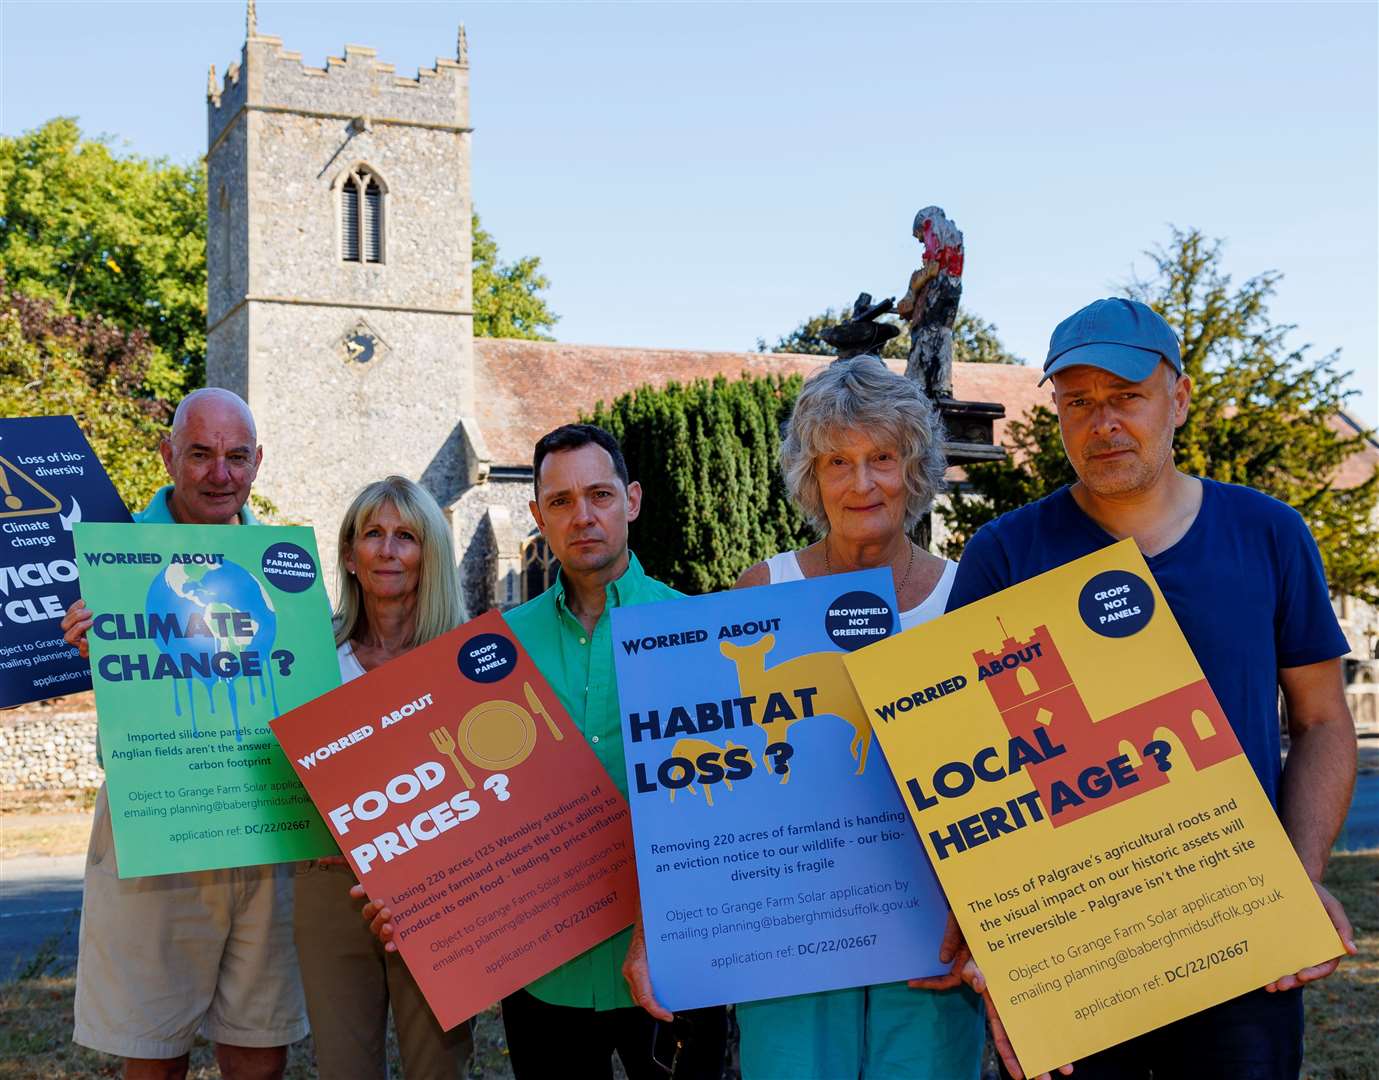 Palgrave, Norfolk, 13/08/2022..Palgrave residents protesting about the proposed solar farm on the outskirts of the village. Pictured from left Jeremy Moynihan, Anne Moynihan, Brad Greenfield, Pat Leigh and Leo Soares.. .Picture: Mark Bullimore Photography 2022.